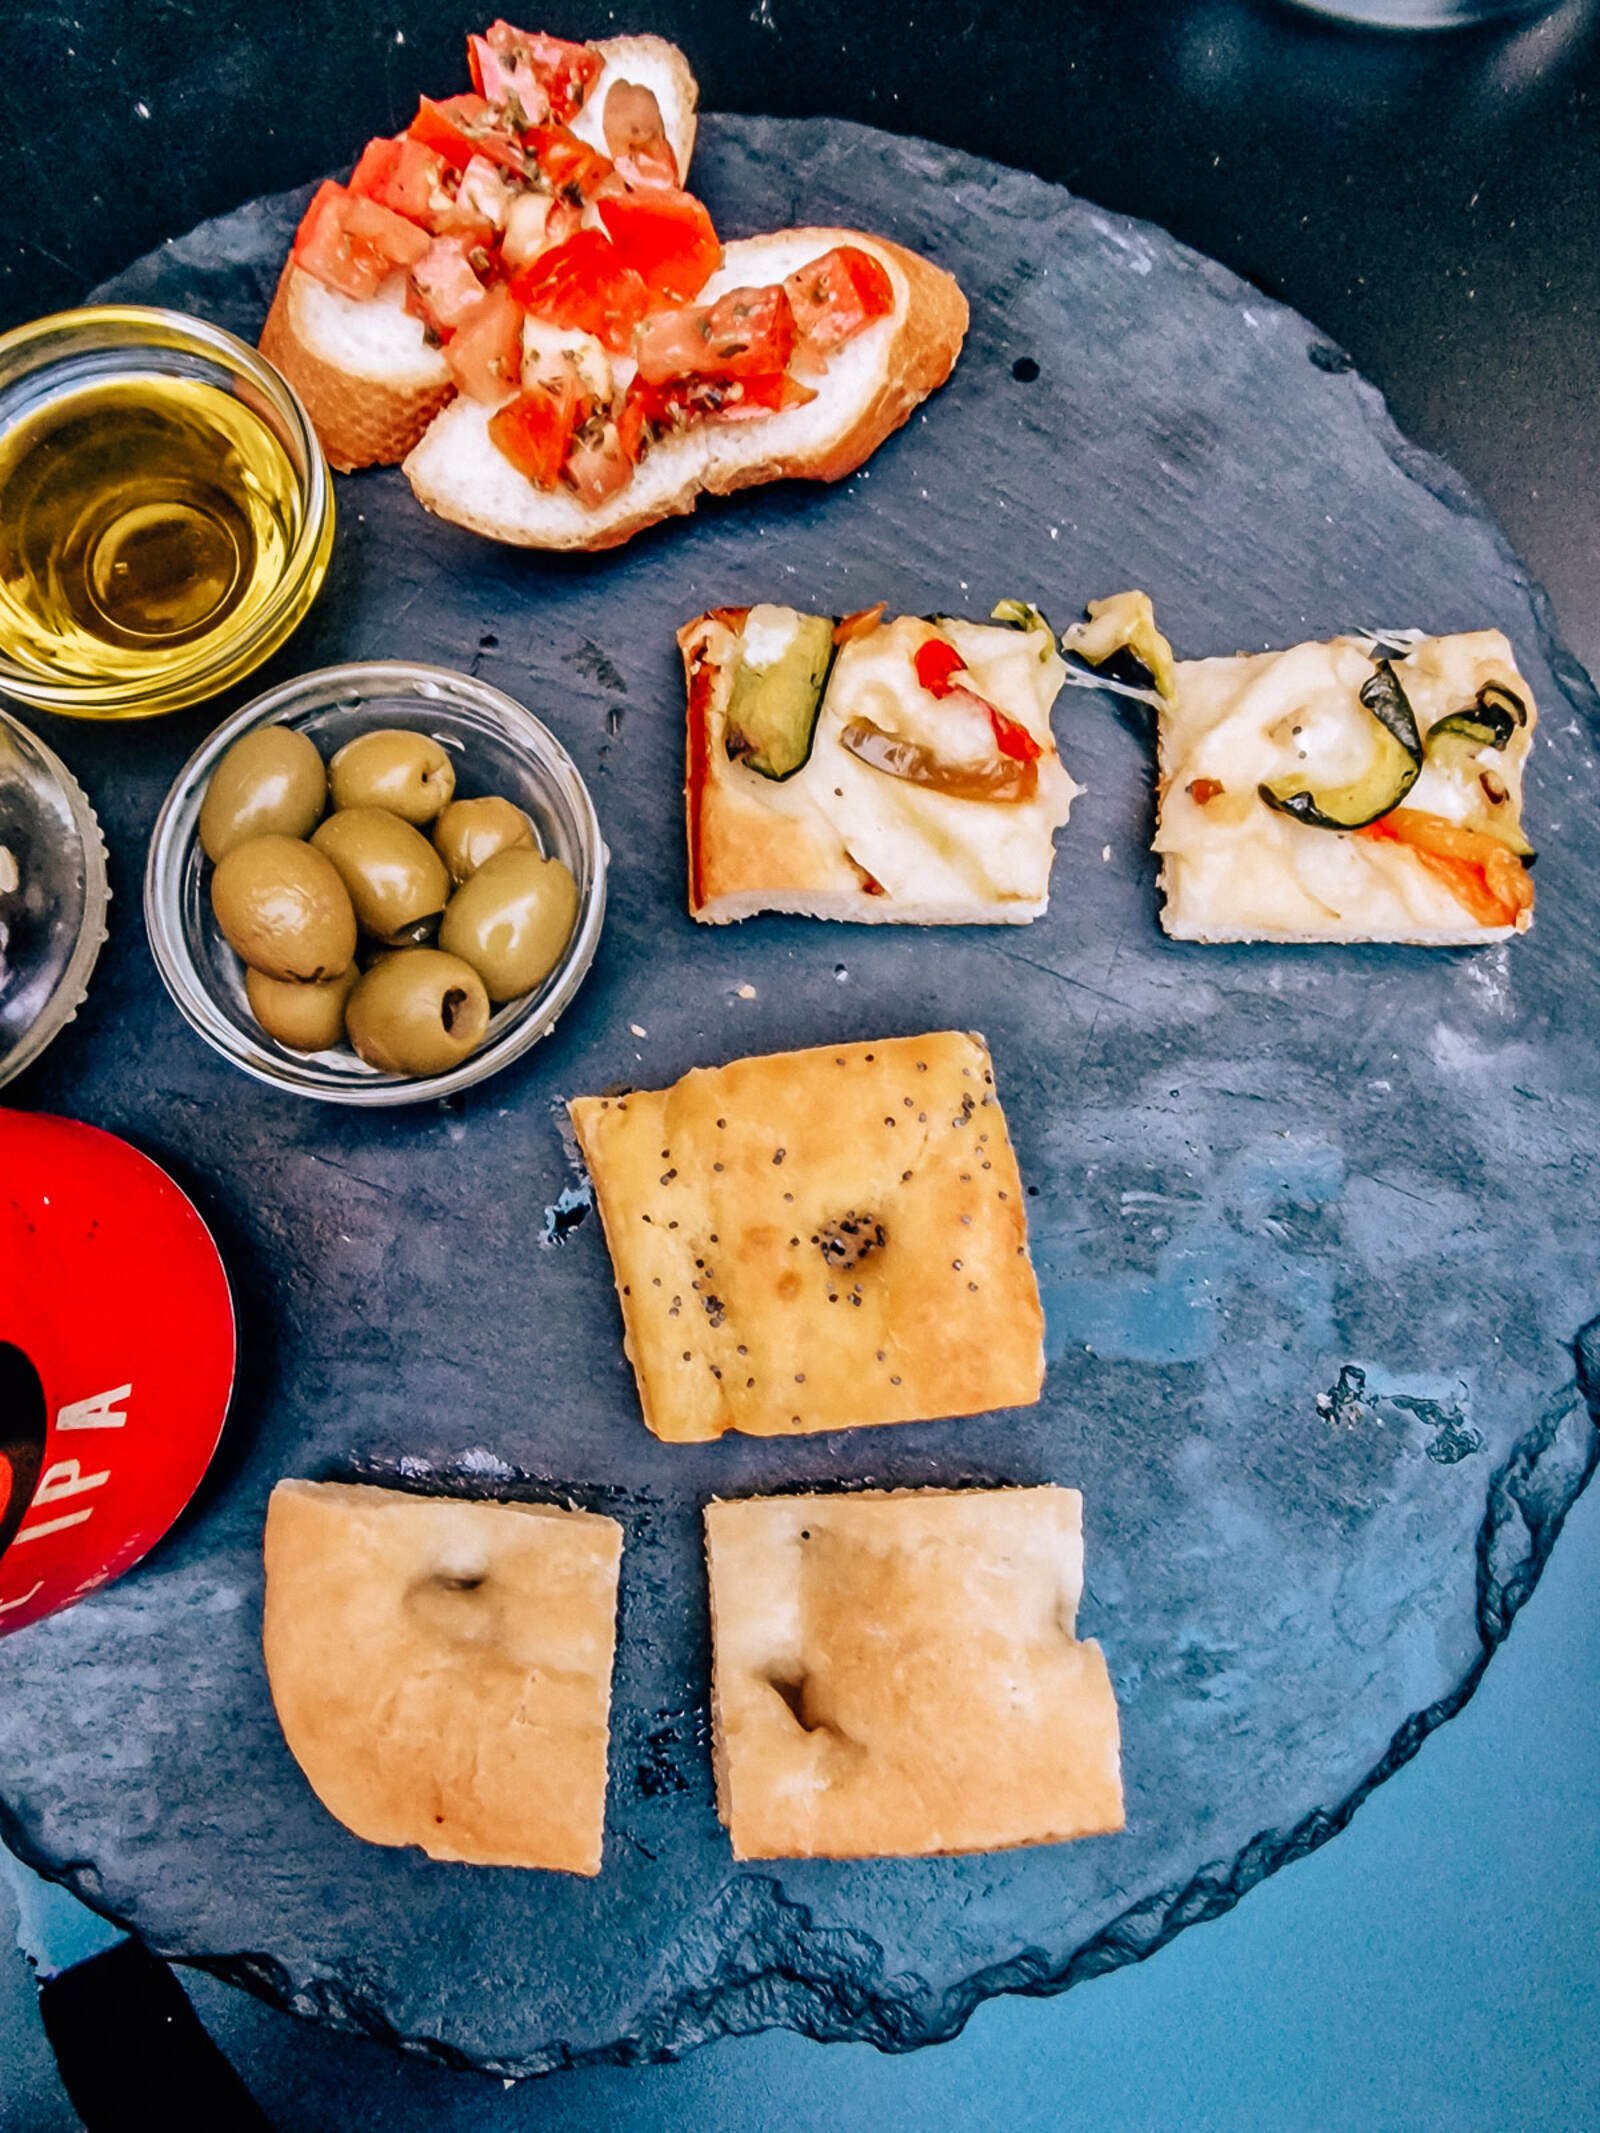 A stone plate with an assortment of Italian snack foods.